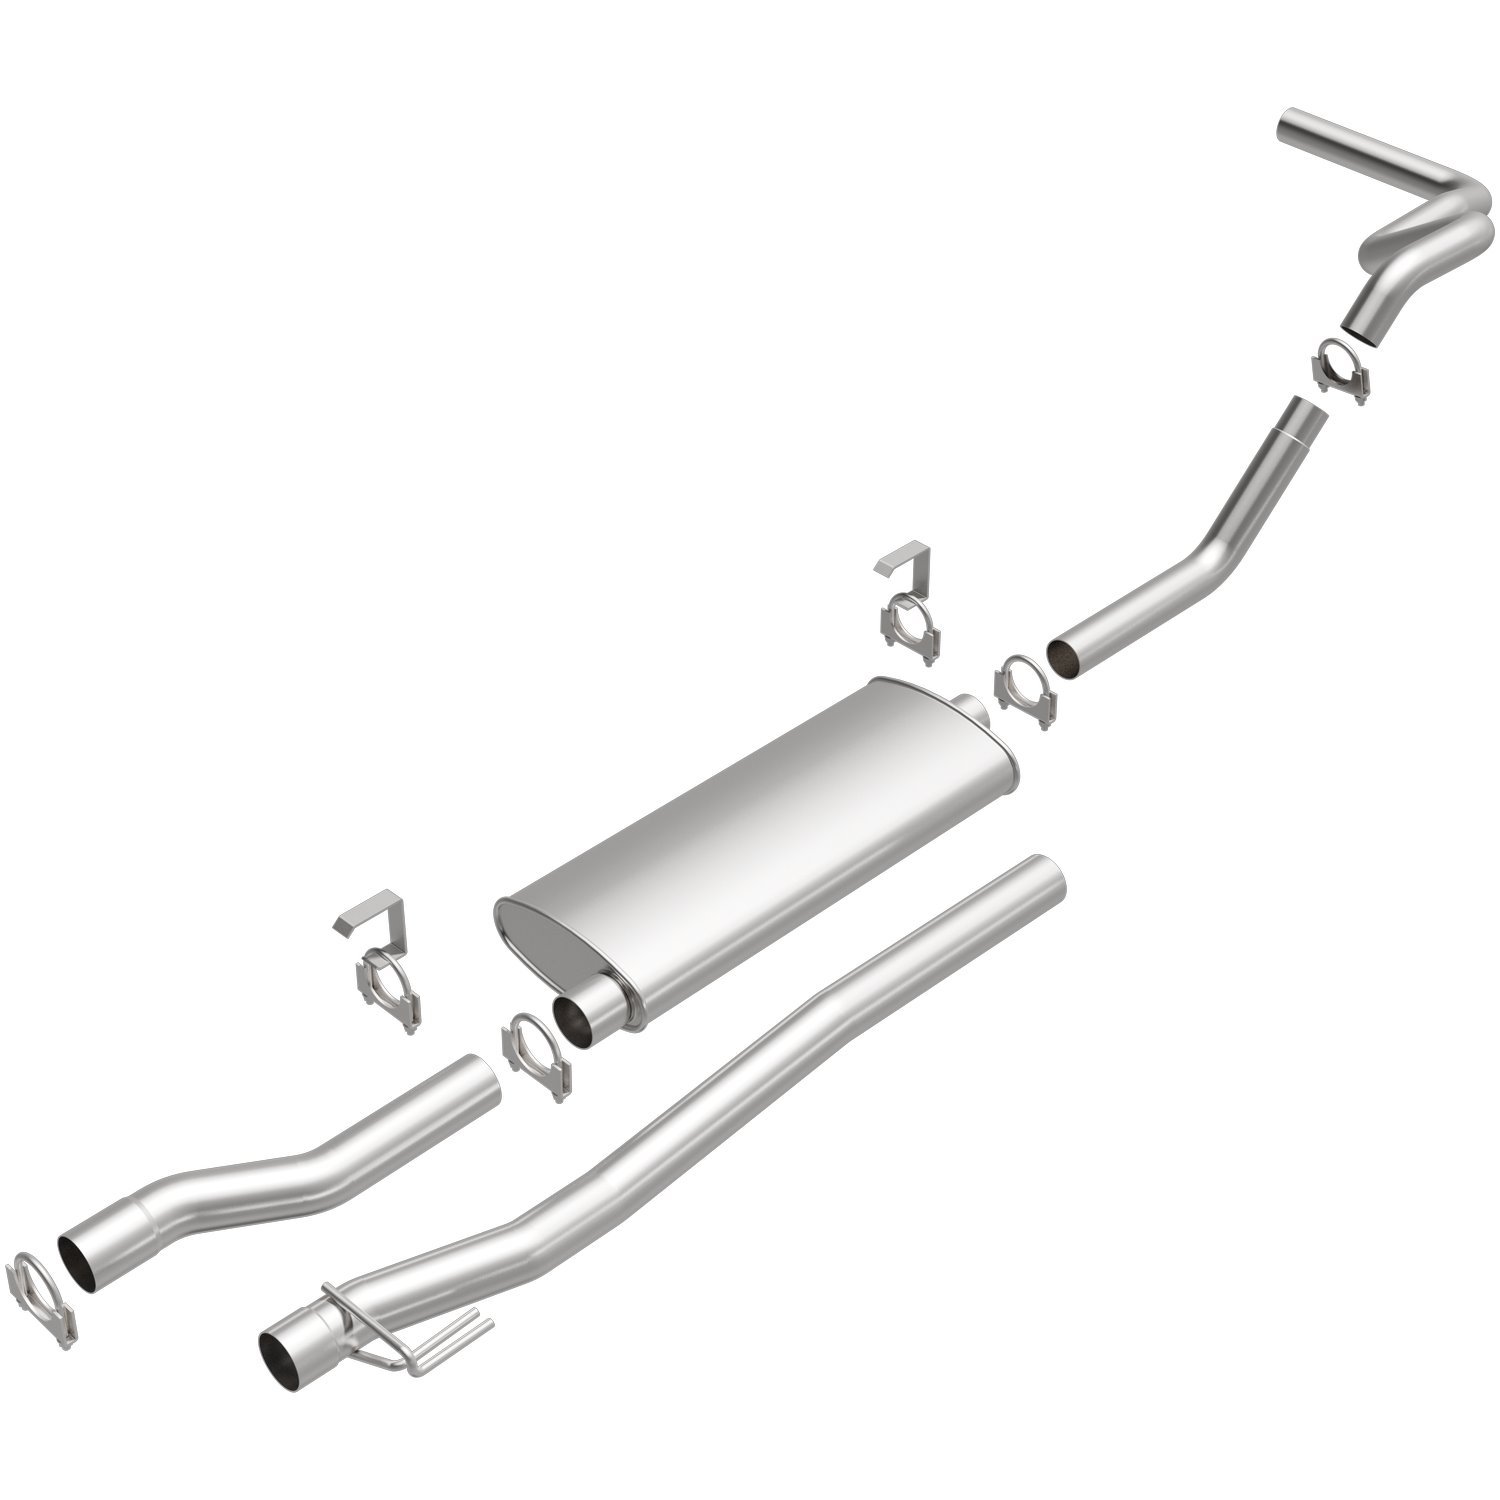 Direct-Fit Exhaust Kit, 1988-1993 Chevy C1500/K1500/C2500/K2500